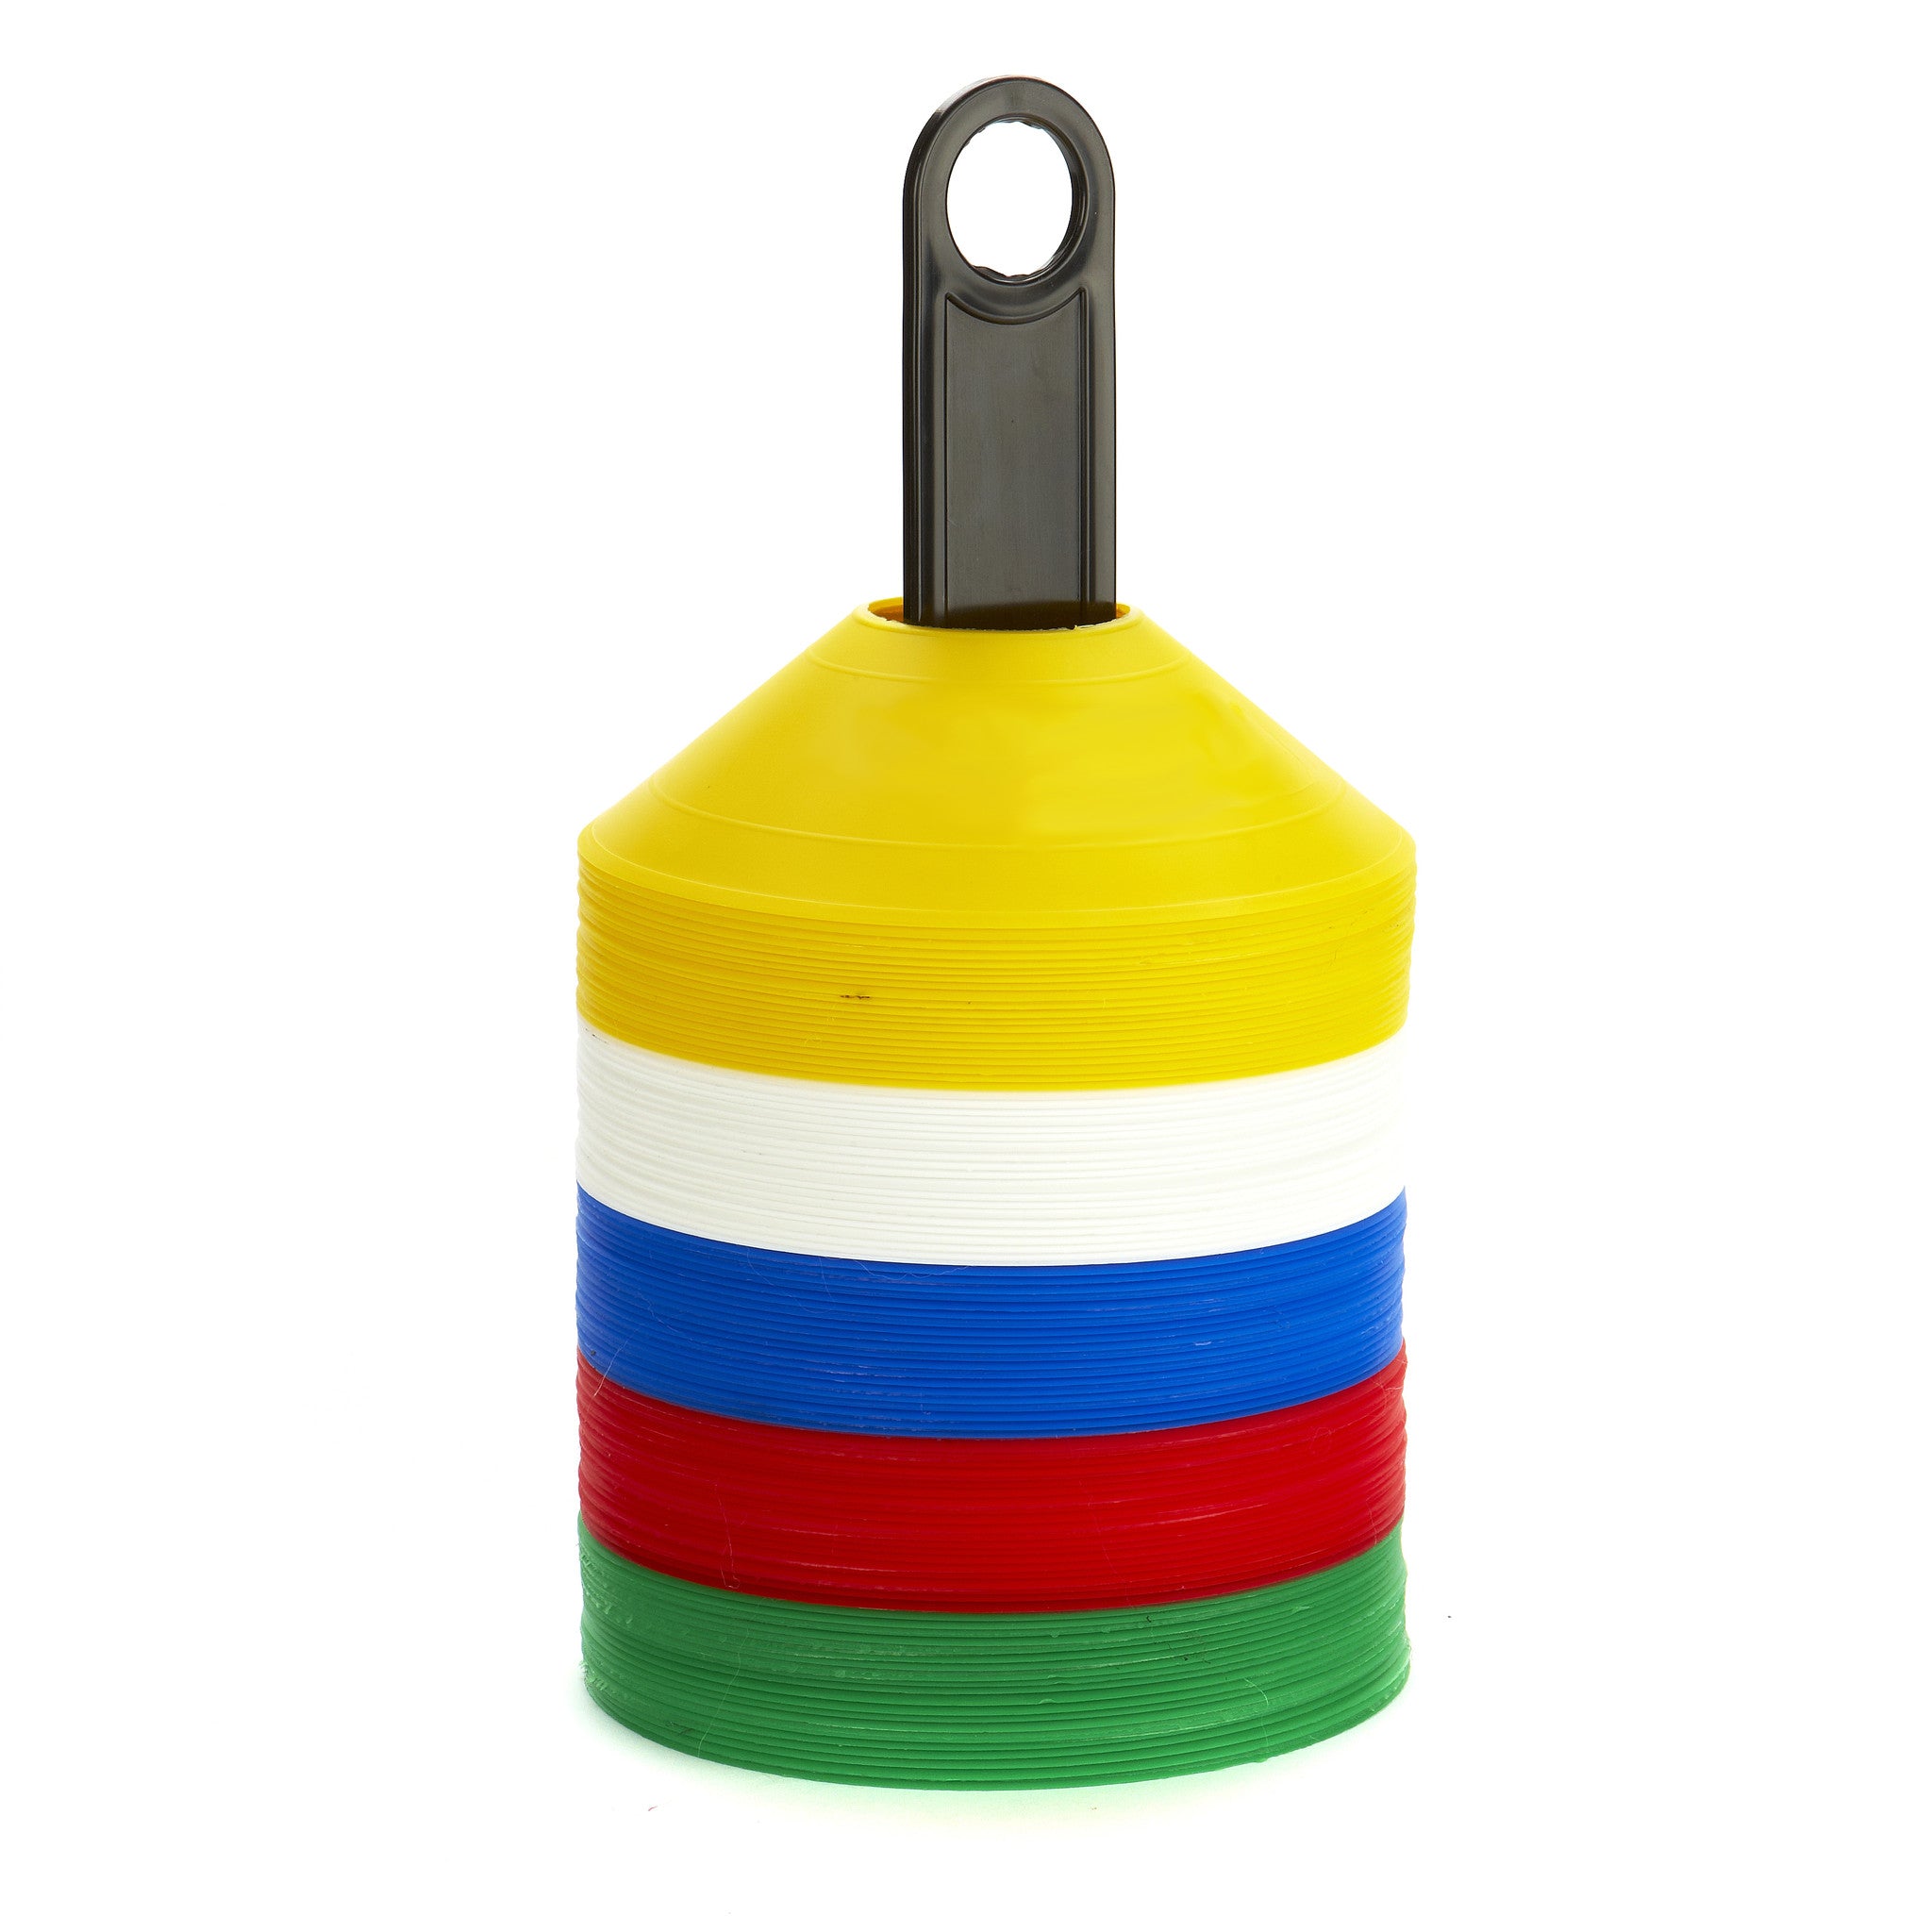 Tennis Coaches' favourite. Soft, safe, colourful Sports Markers. Set of 100 red, green, blue, yellow & white markers on a carry pole.